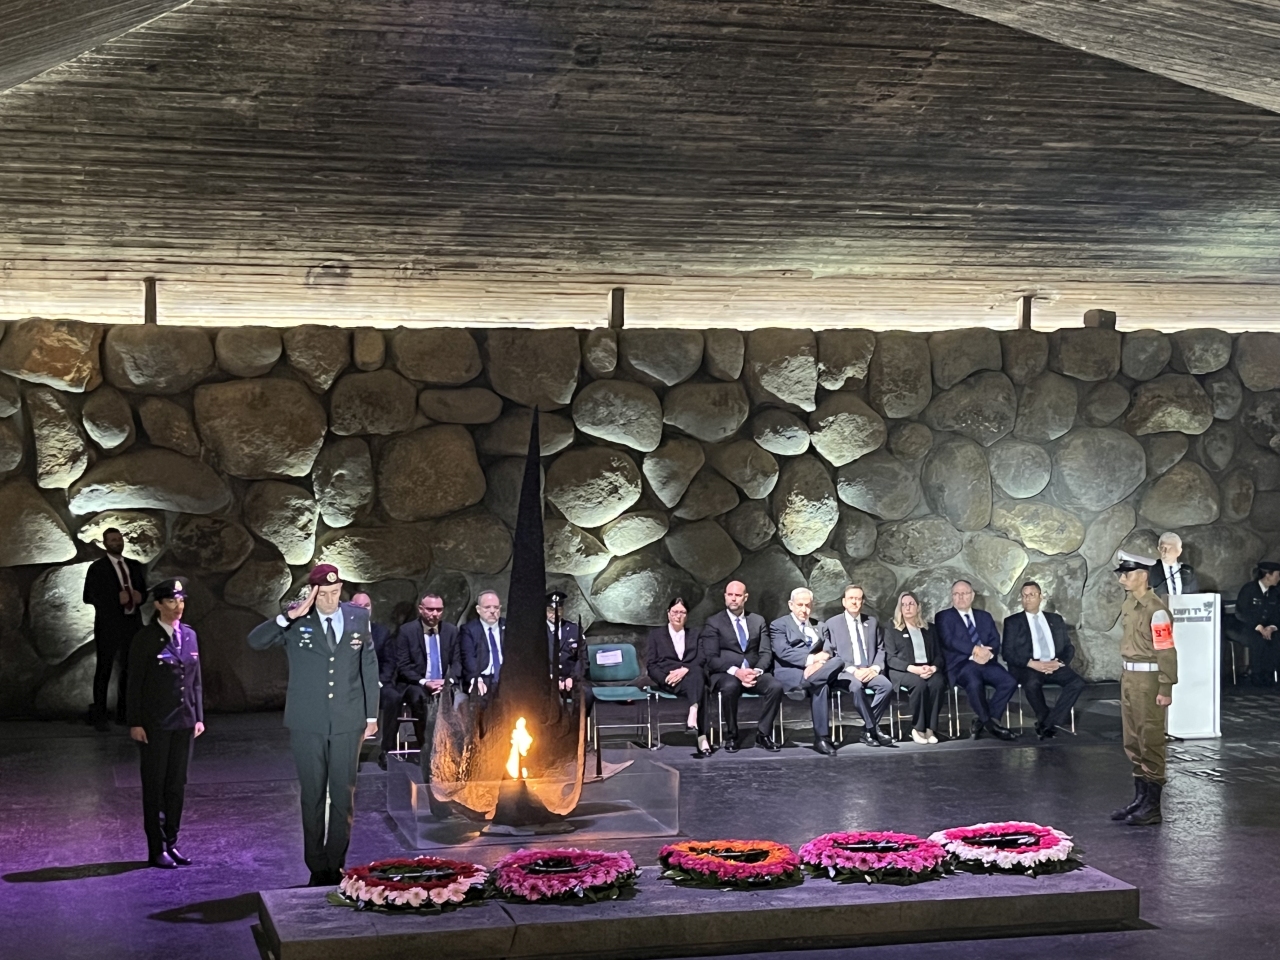 Wreaths were laid in memory of the Holocaust victims in the Hall of Remembrance by Israeli dignitaries 